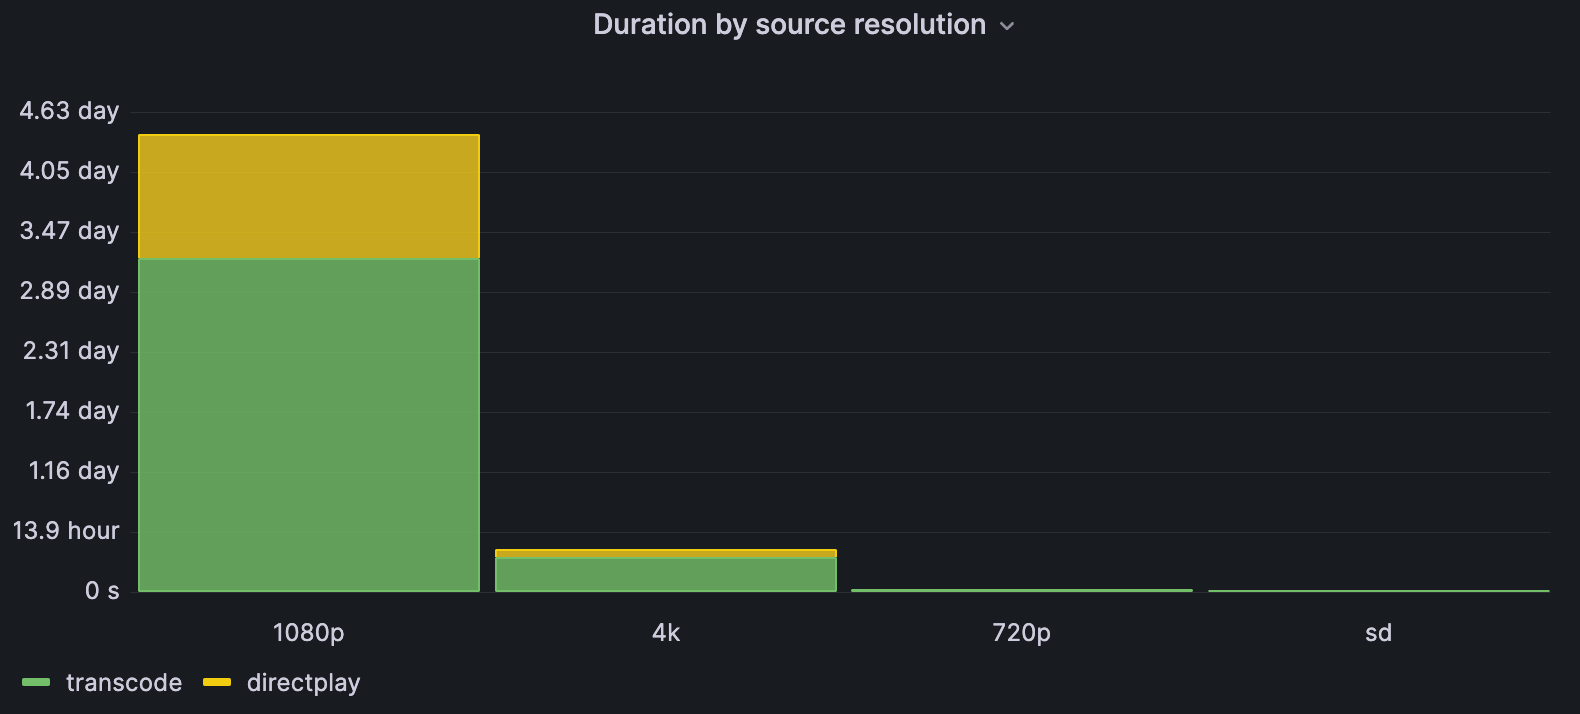 A Grafana dashboard shows usage times for different types of source resolutions.